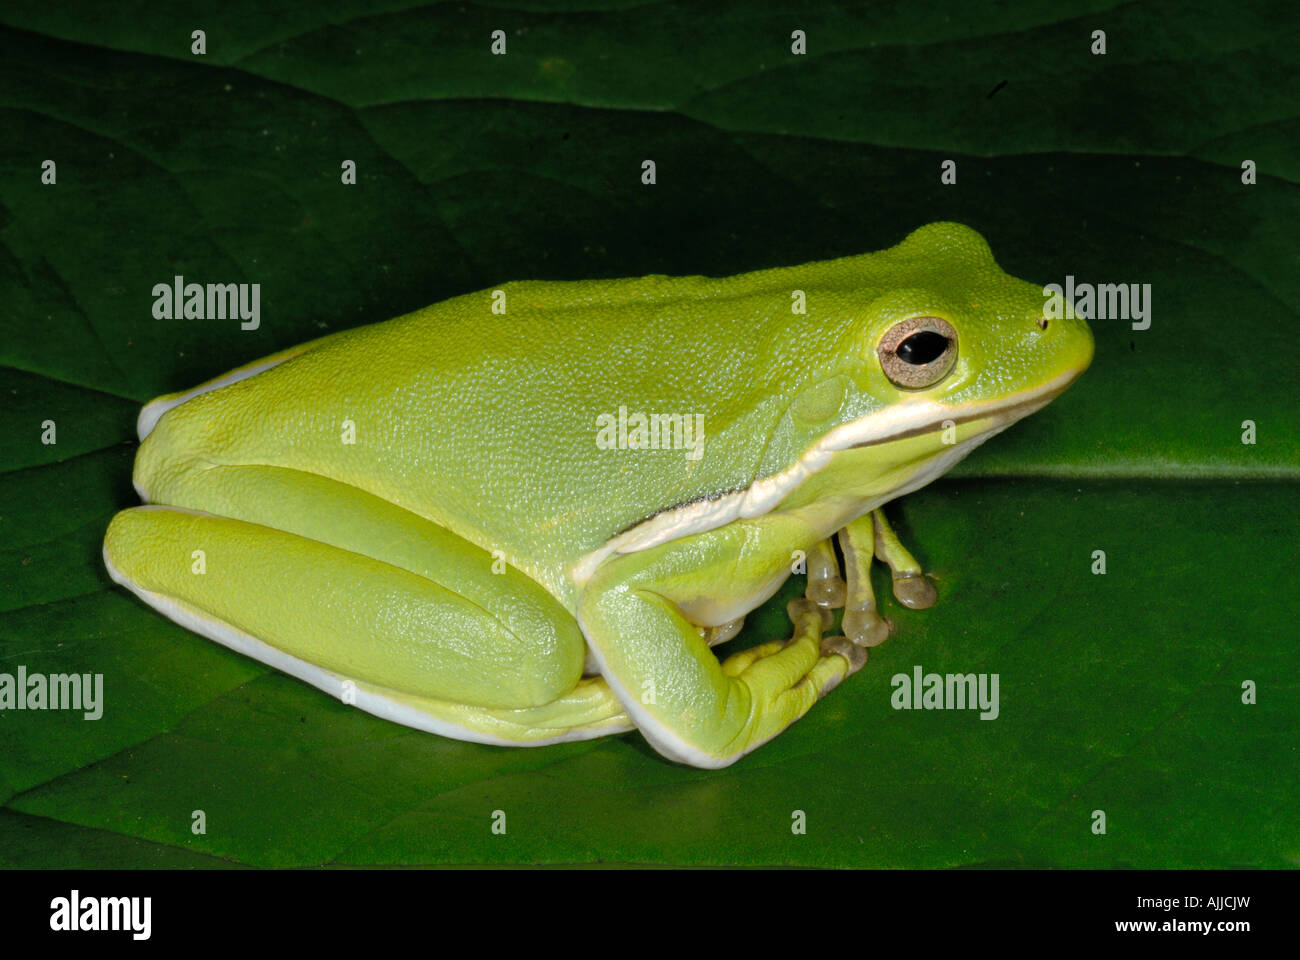 green tree frog Hyla cinerea a common frog of the southern United States Stock Photo